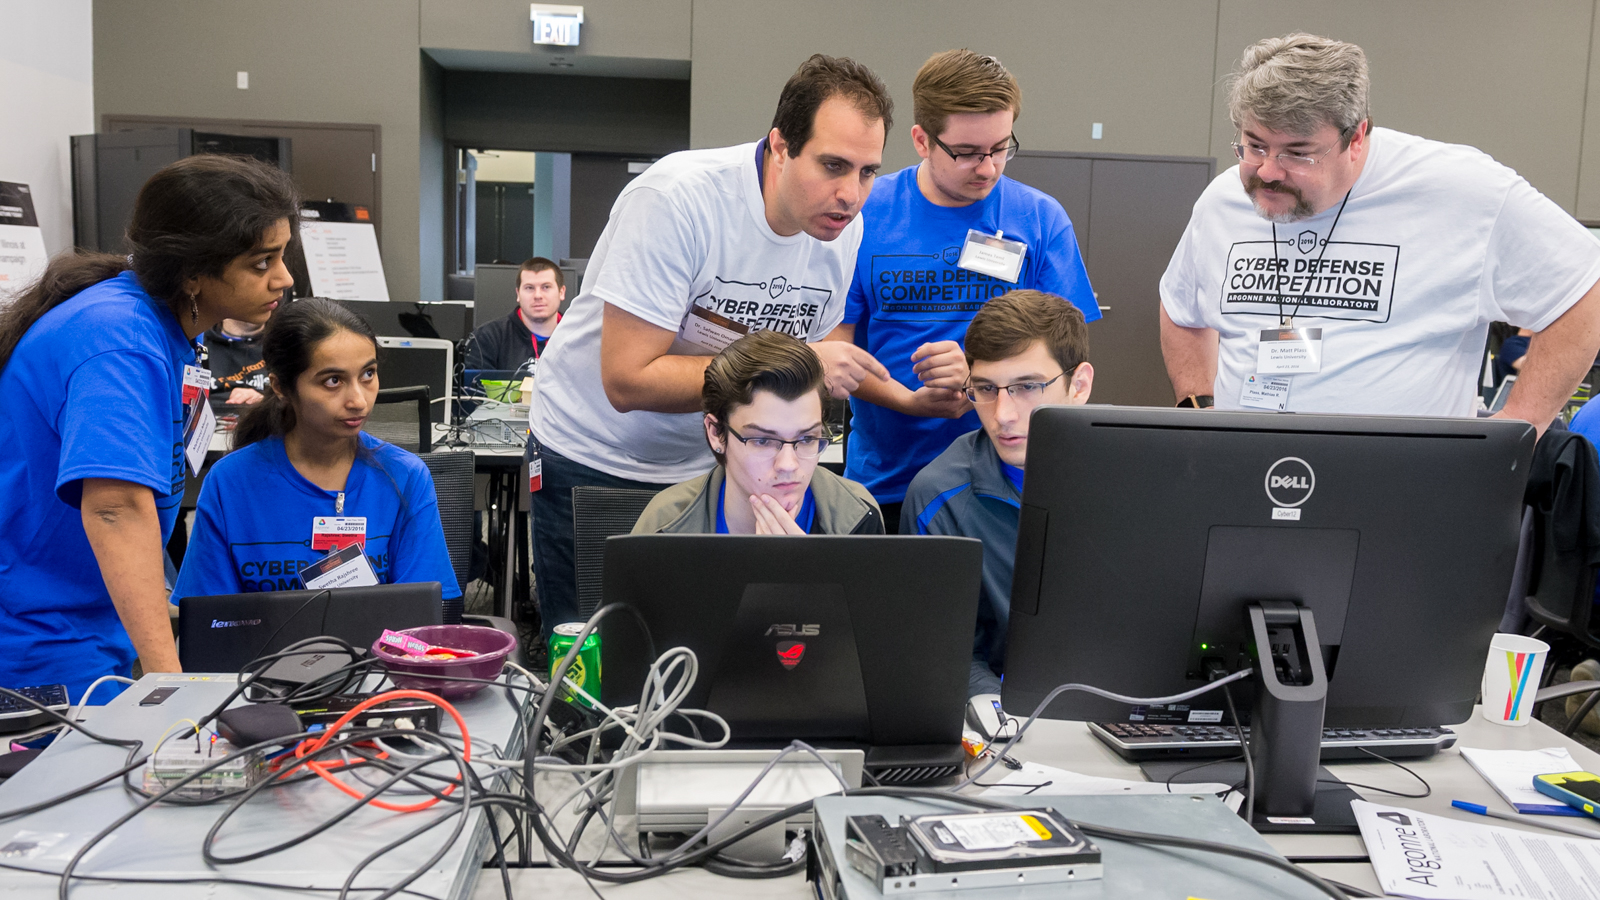 Members of the team from Lewis University work to defend their virtual grid system from attack at the first annual Argonne Collegiate Cyber Defense Competition